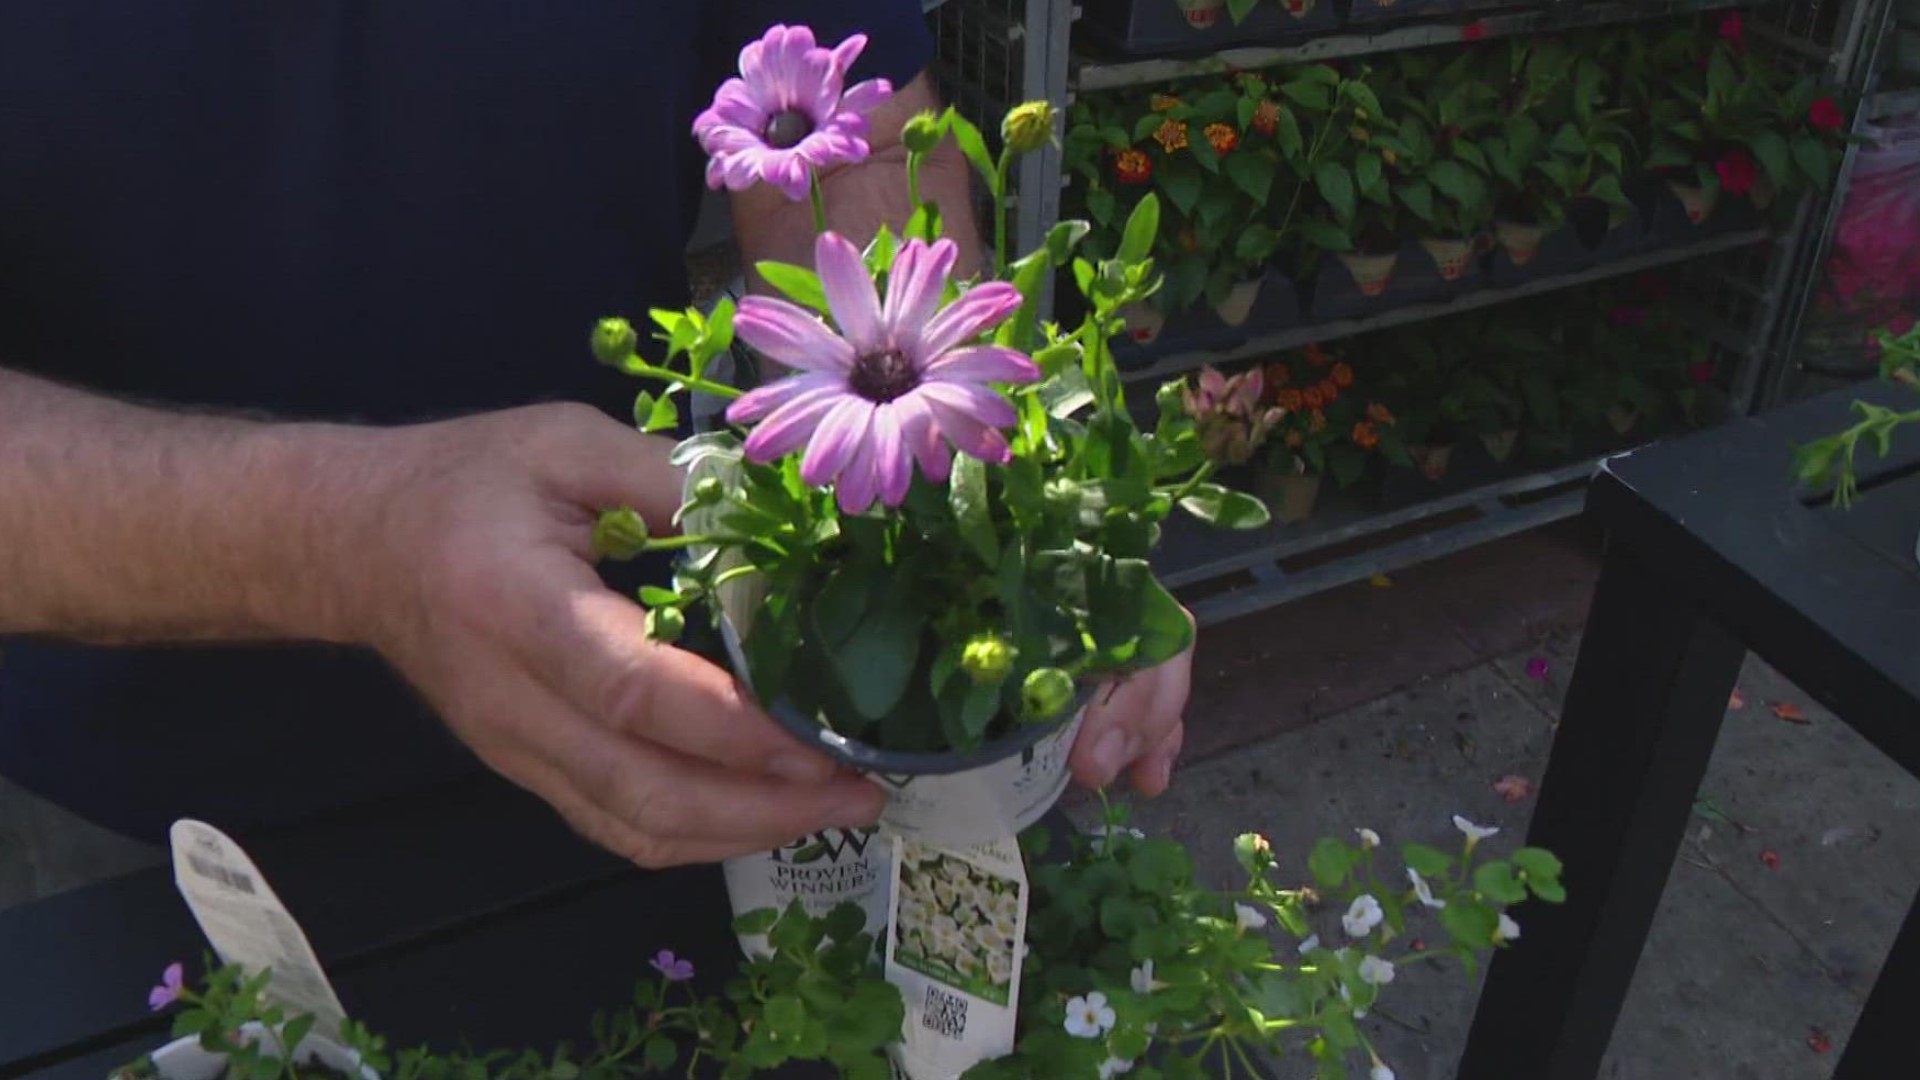 Pat Sullivan provides a tour of the newest varieties of annual flowers and landscape plants.